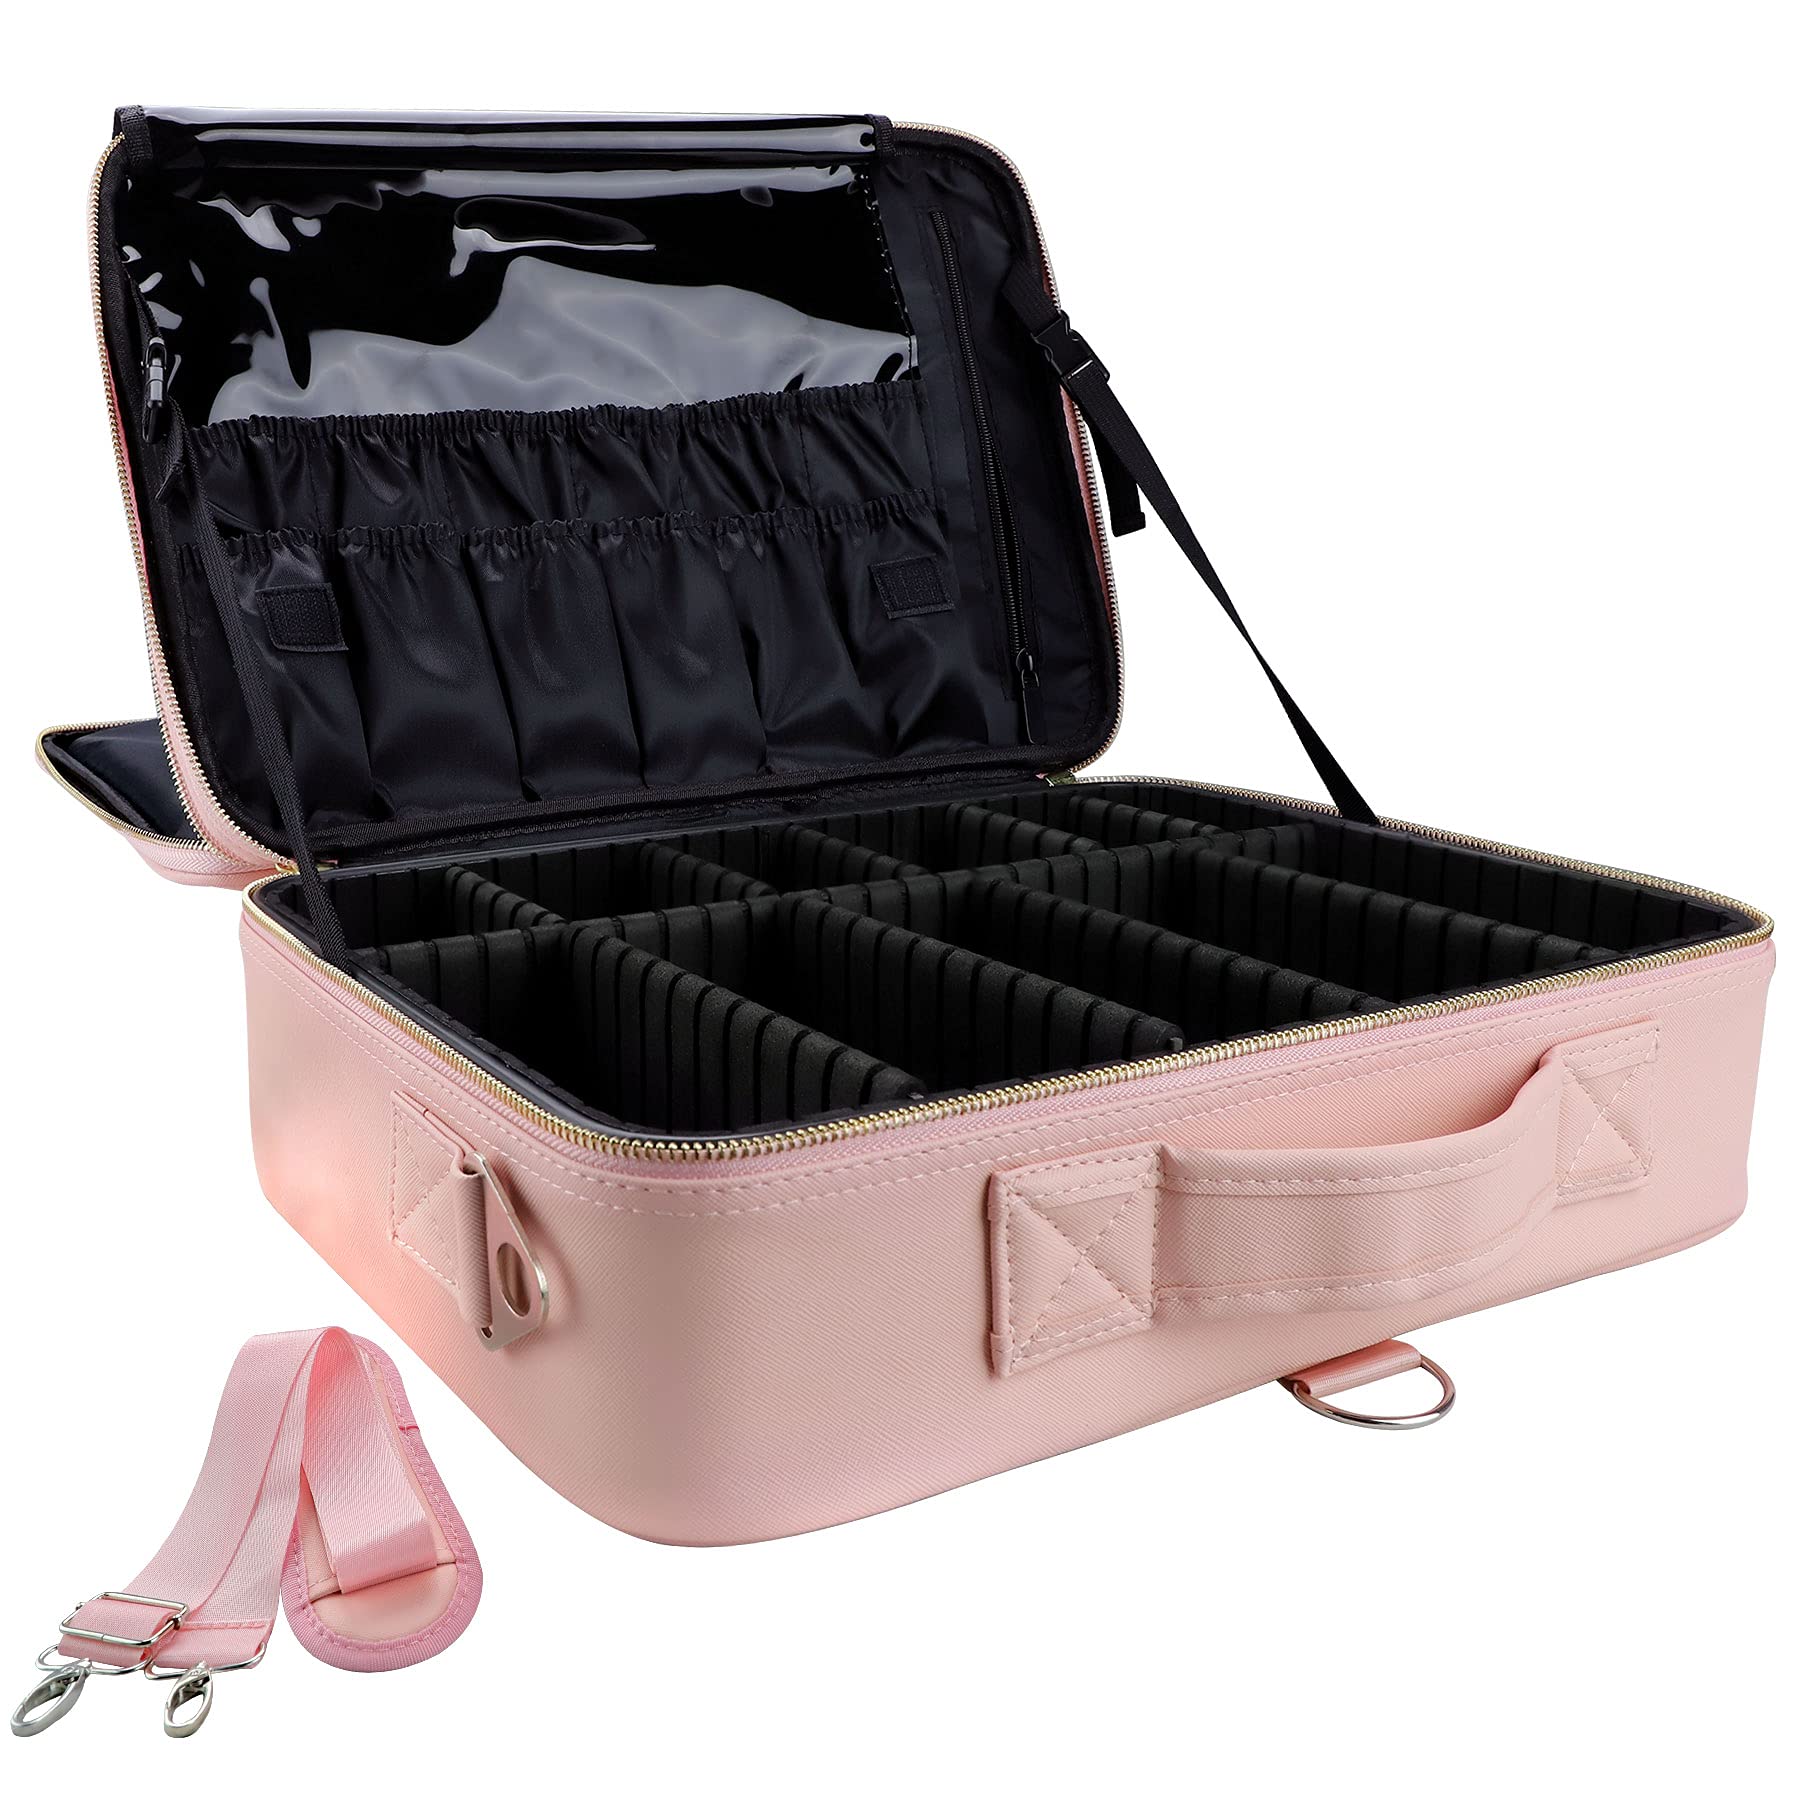 OEWOER PU Leather Professional Makeup Bag 16 Inches Travel Makeup Case Large Cosmetic Train Case Sets Cosmetic Organizer Box with Adjustable Strap ...